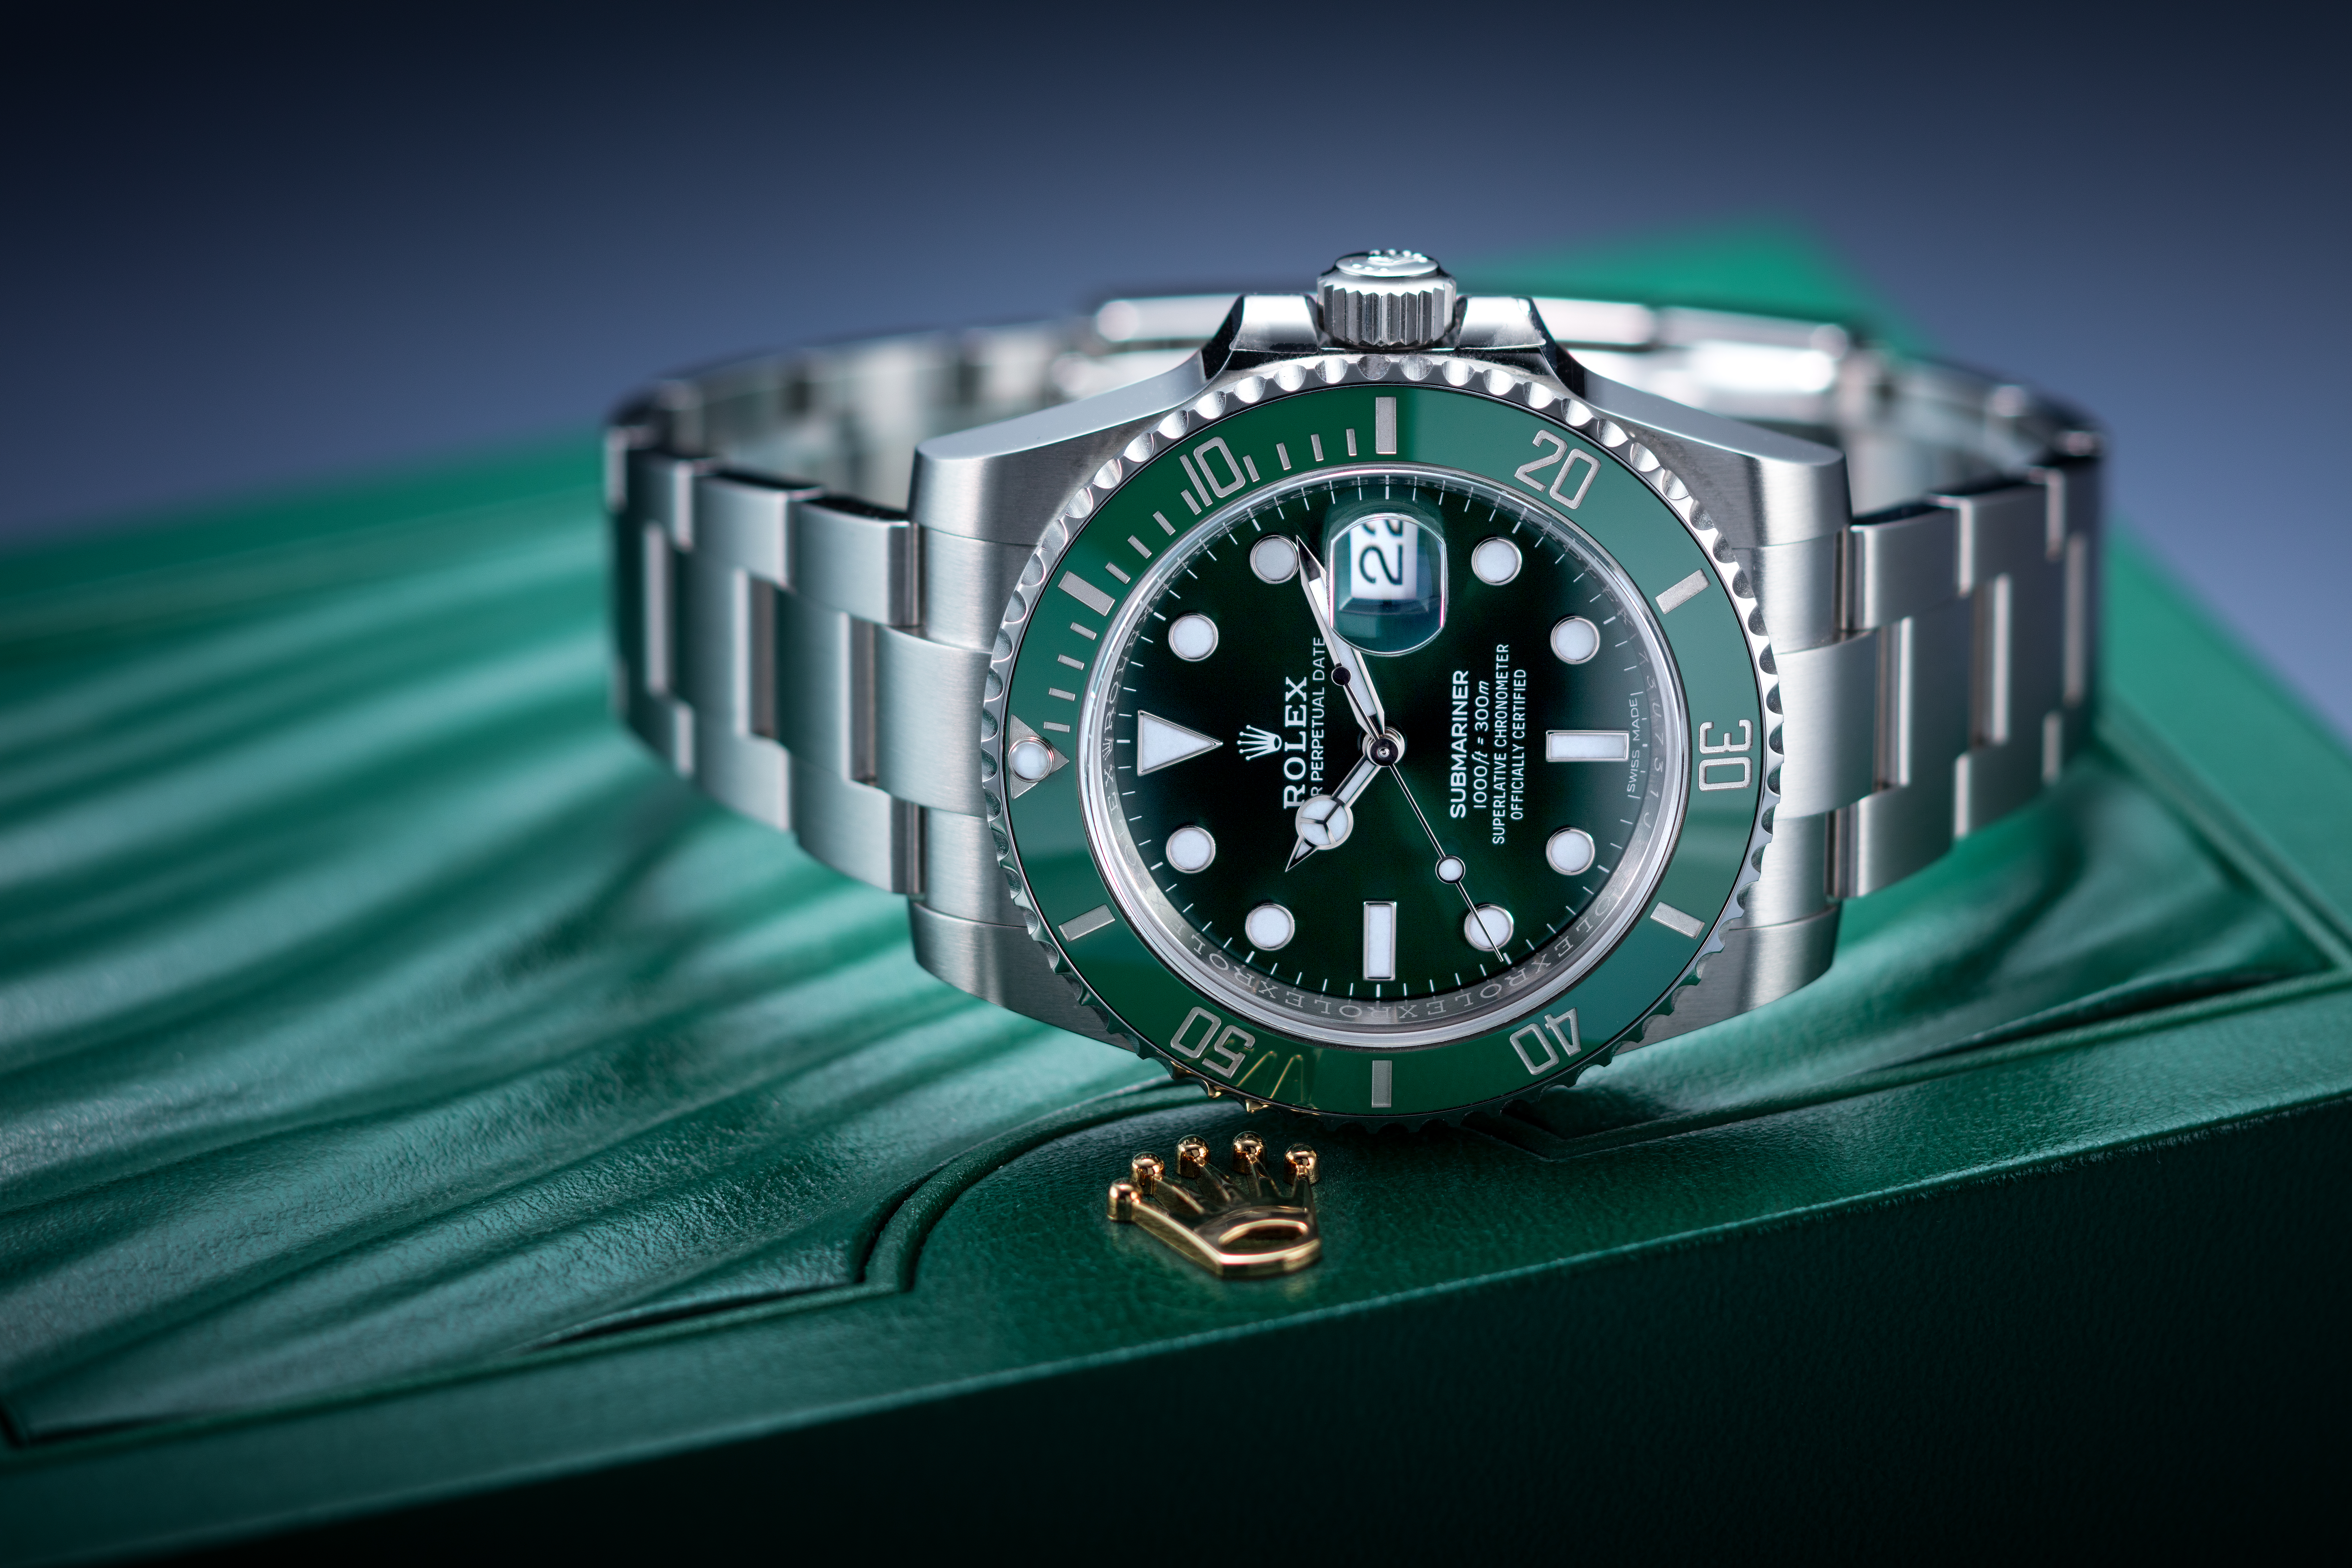 Rolex Oyster Perpetual feature